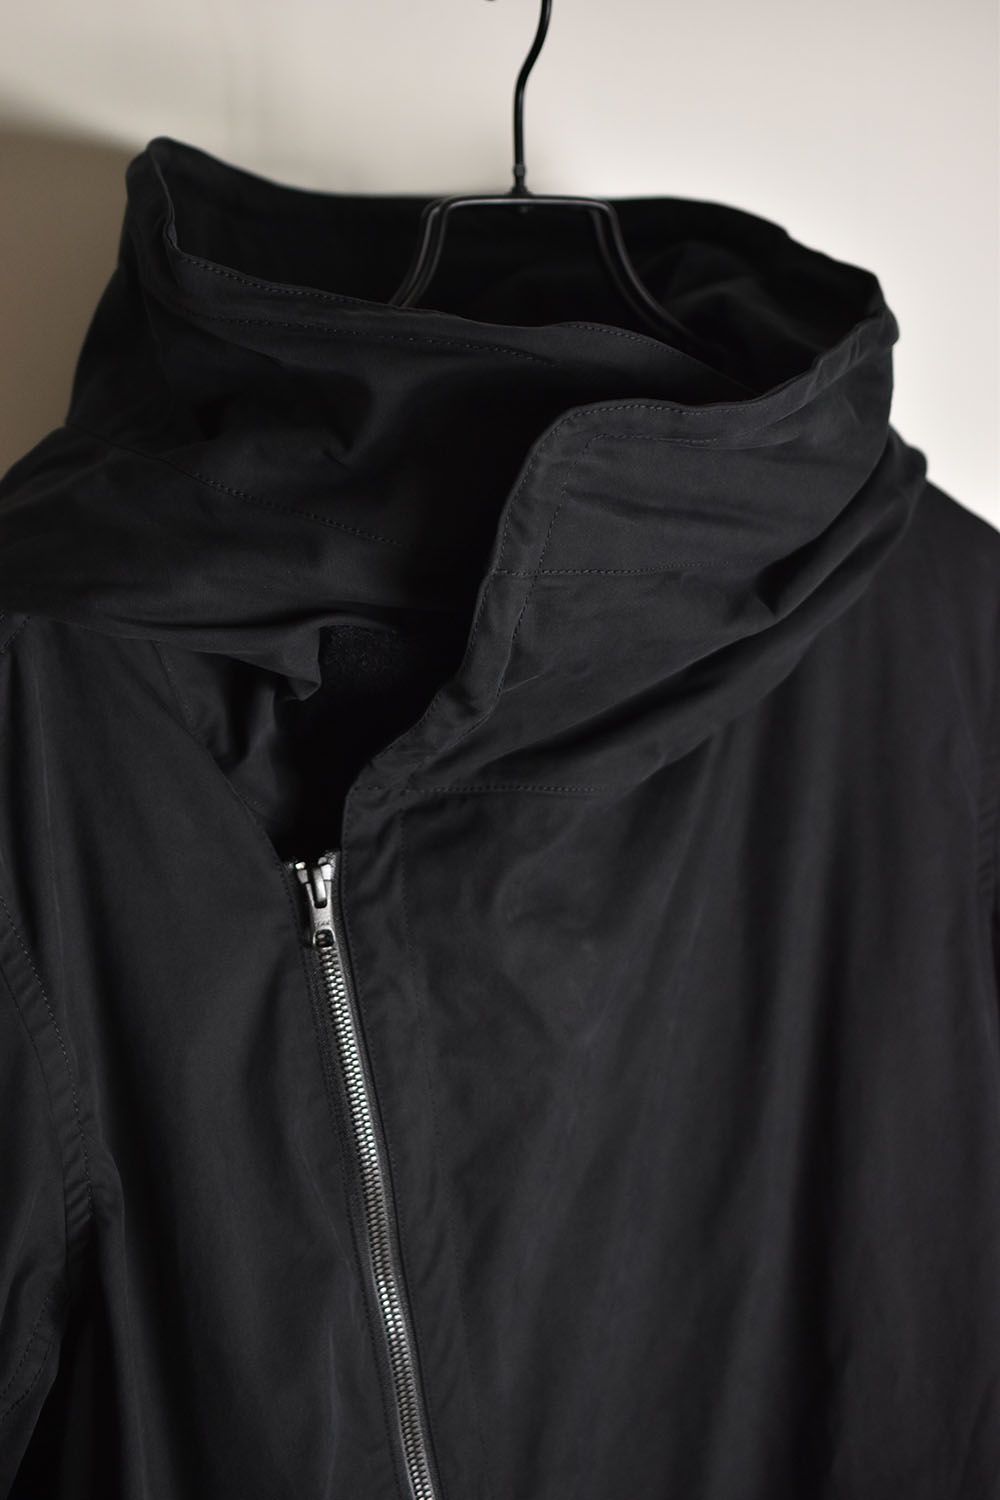 MULTI ZIP MILITARY HOODIE COAT - WITHOUT PATCHES"Black"/マルチジップミリタリーコート"ブラック"